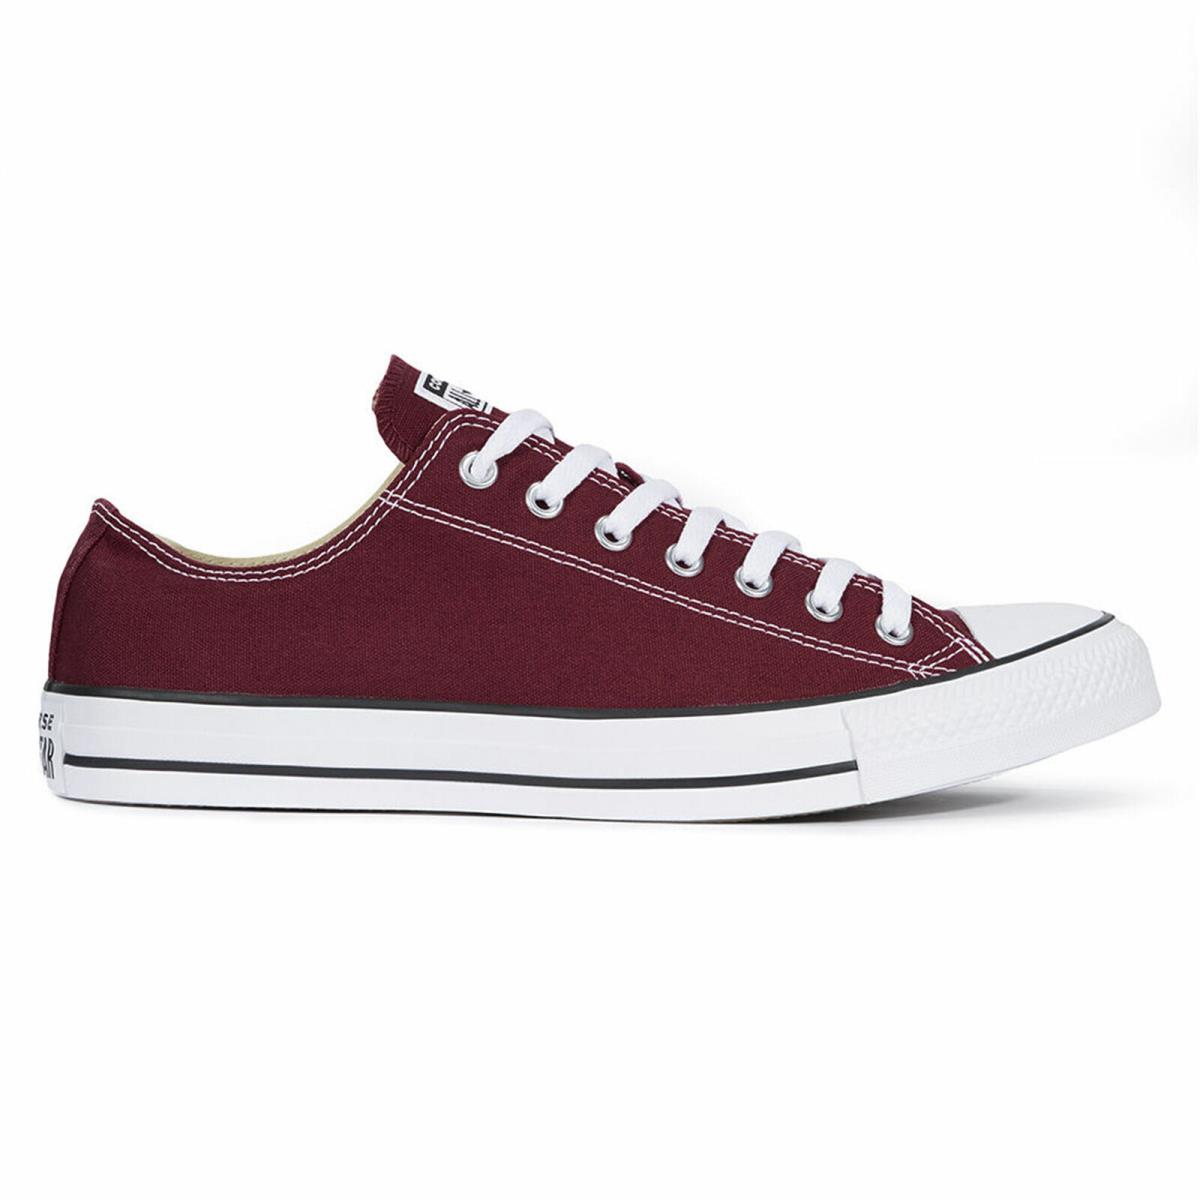 Converse Chuck Taylor All Star Low Top Unisex Canvas Sneaker Shoes Maroon